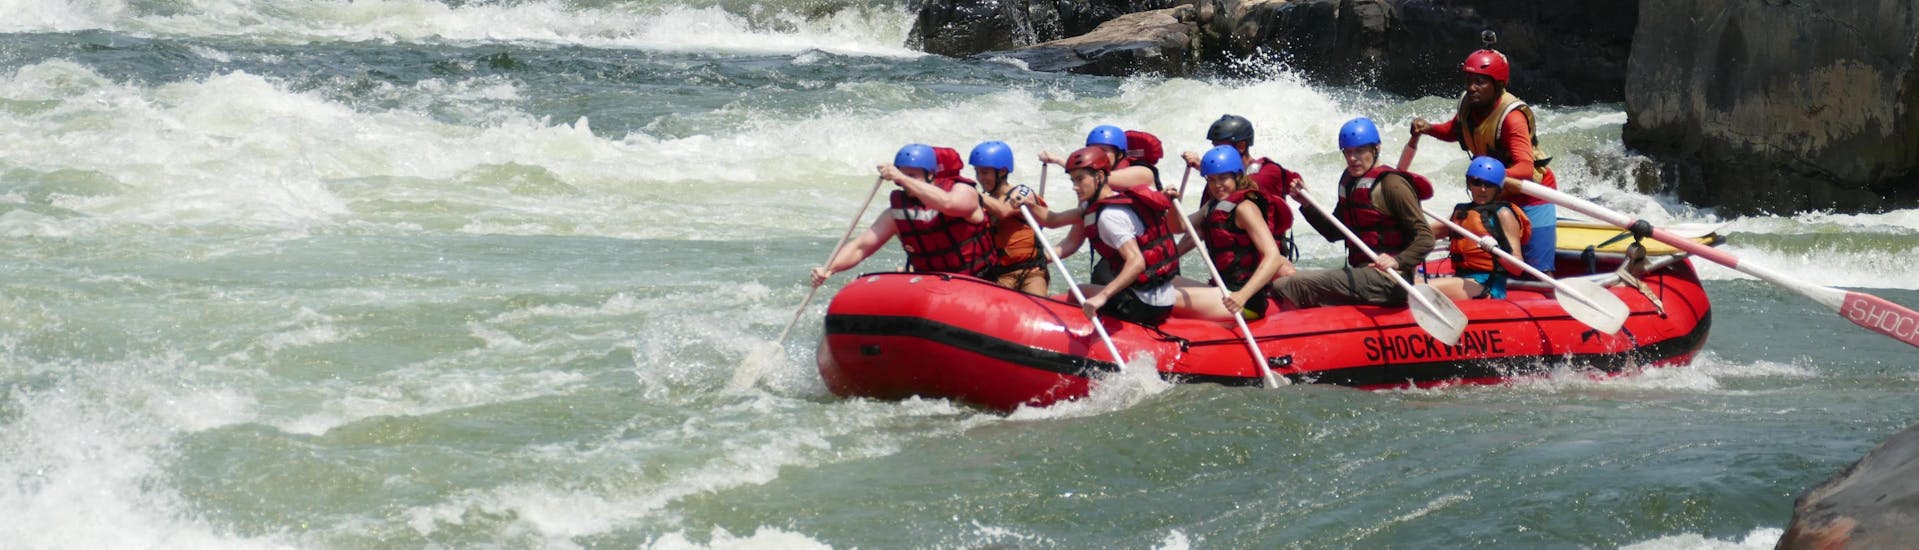 Rafting &amp; Game Drive above Victoria Falls  with Shockwave Adventures - Hero image